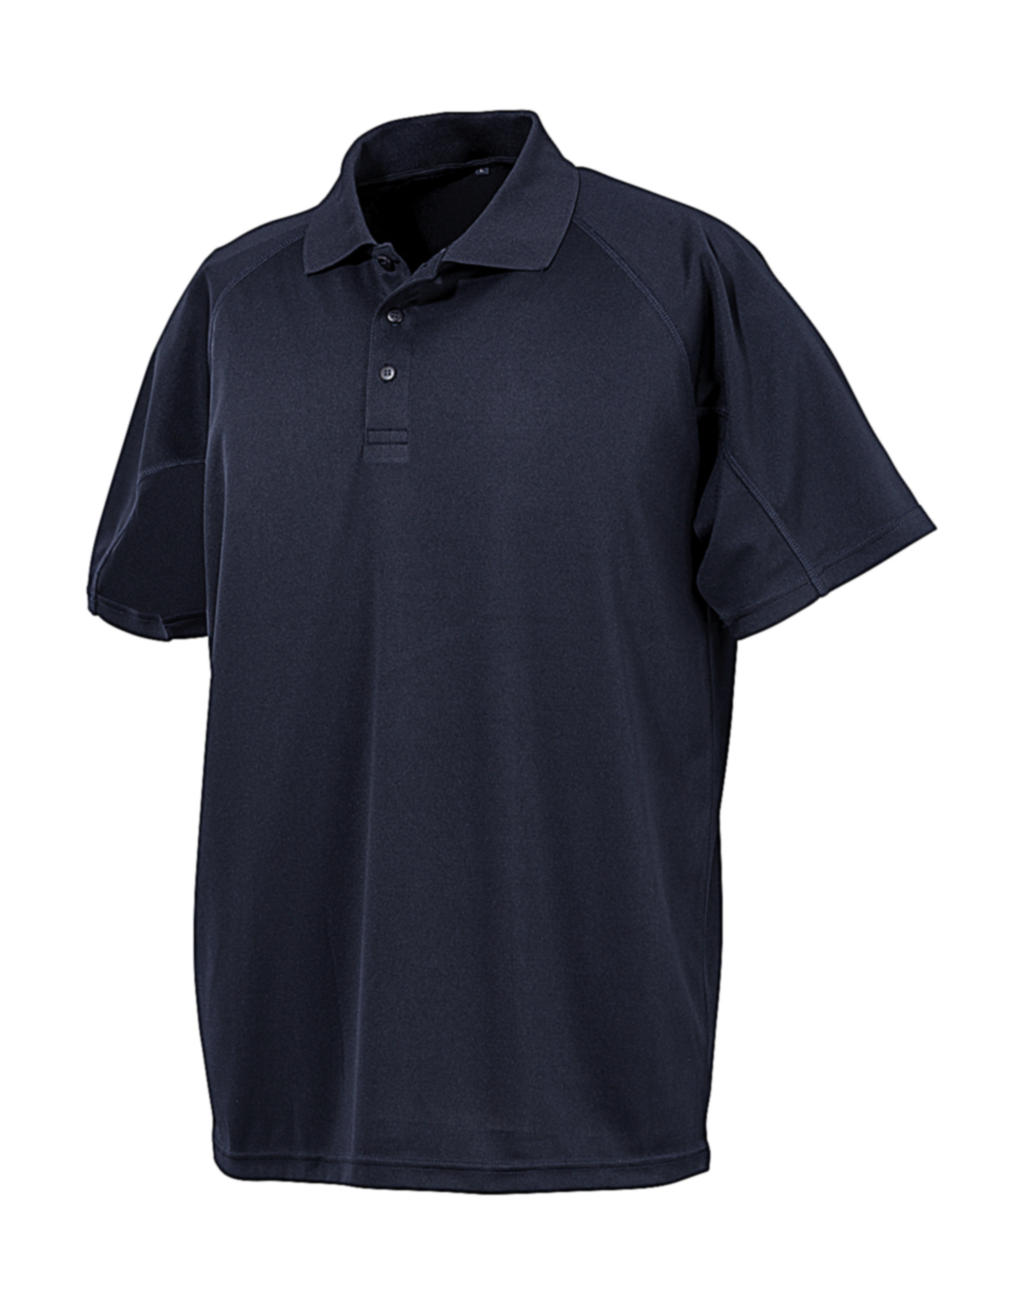  Performance Aircool Polo in Farbe Navy